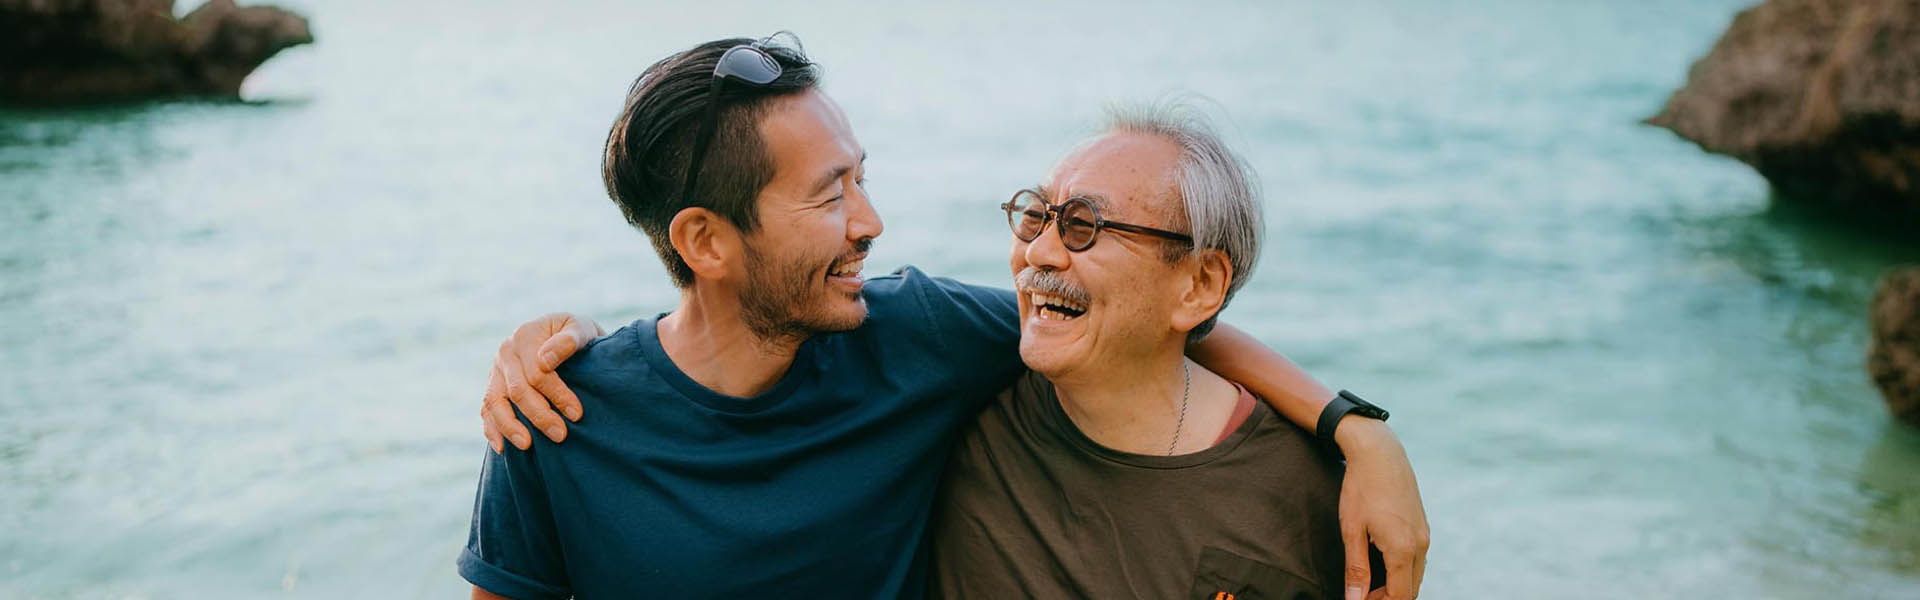 Senior Father and adult son having a good time at the beach at sunset.